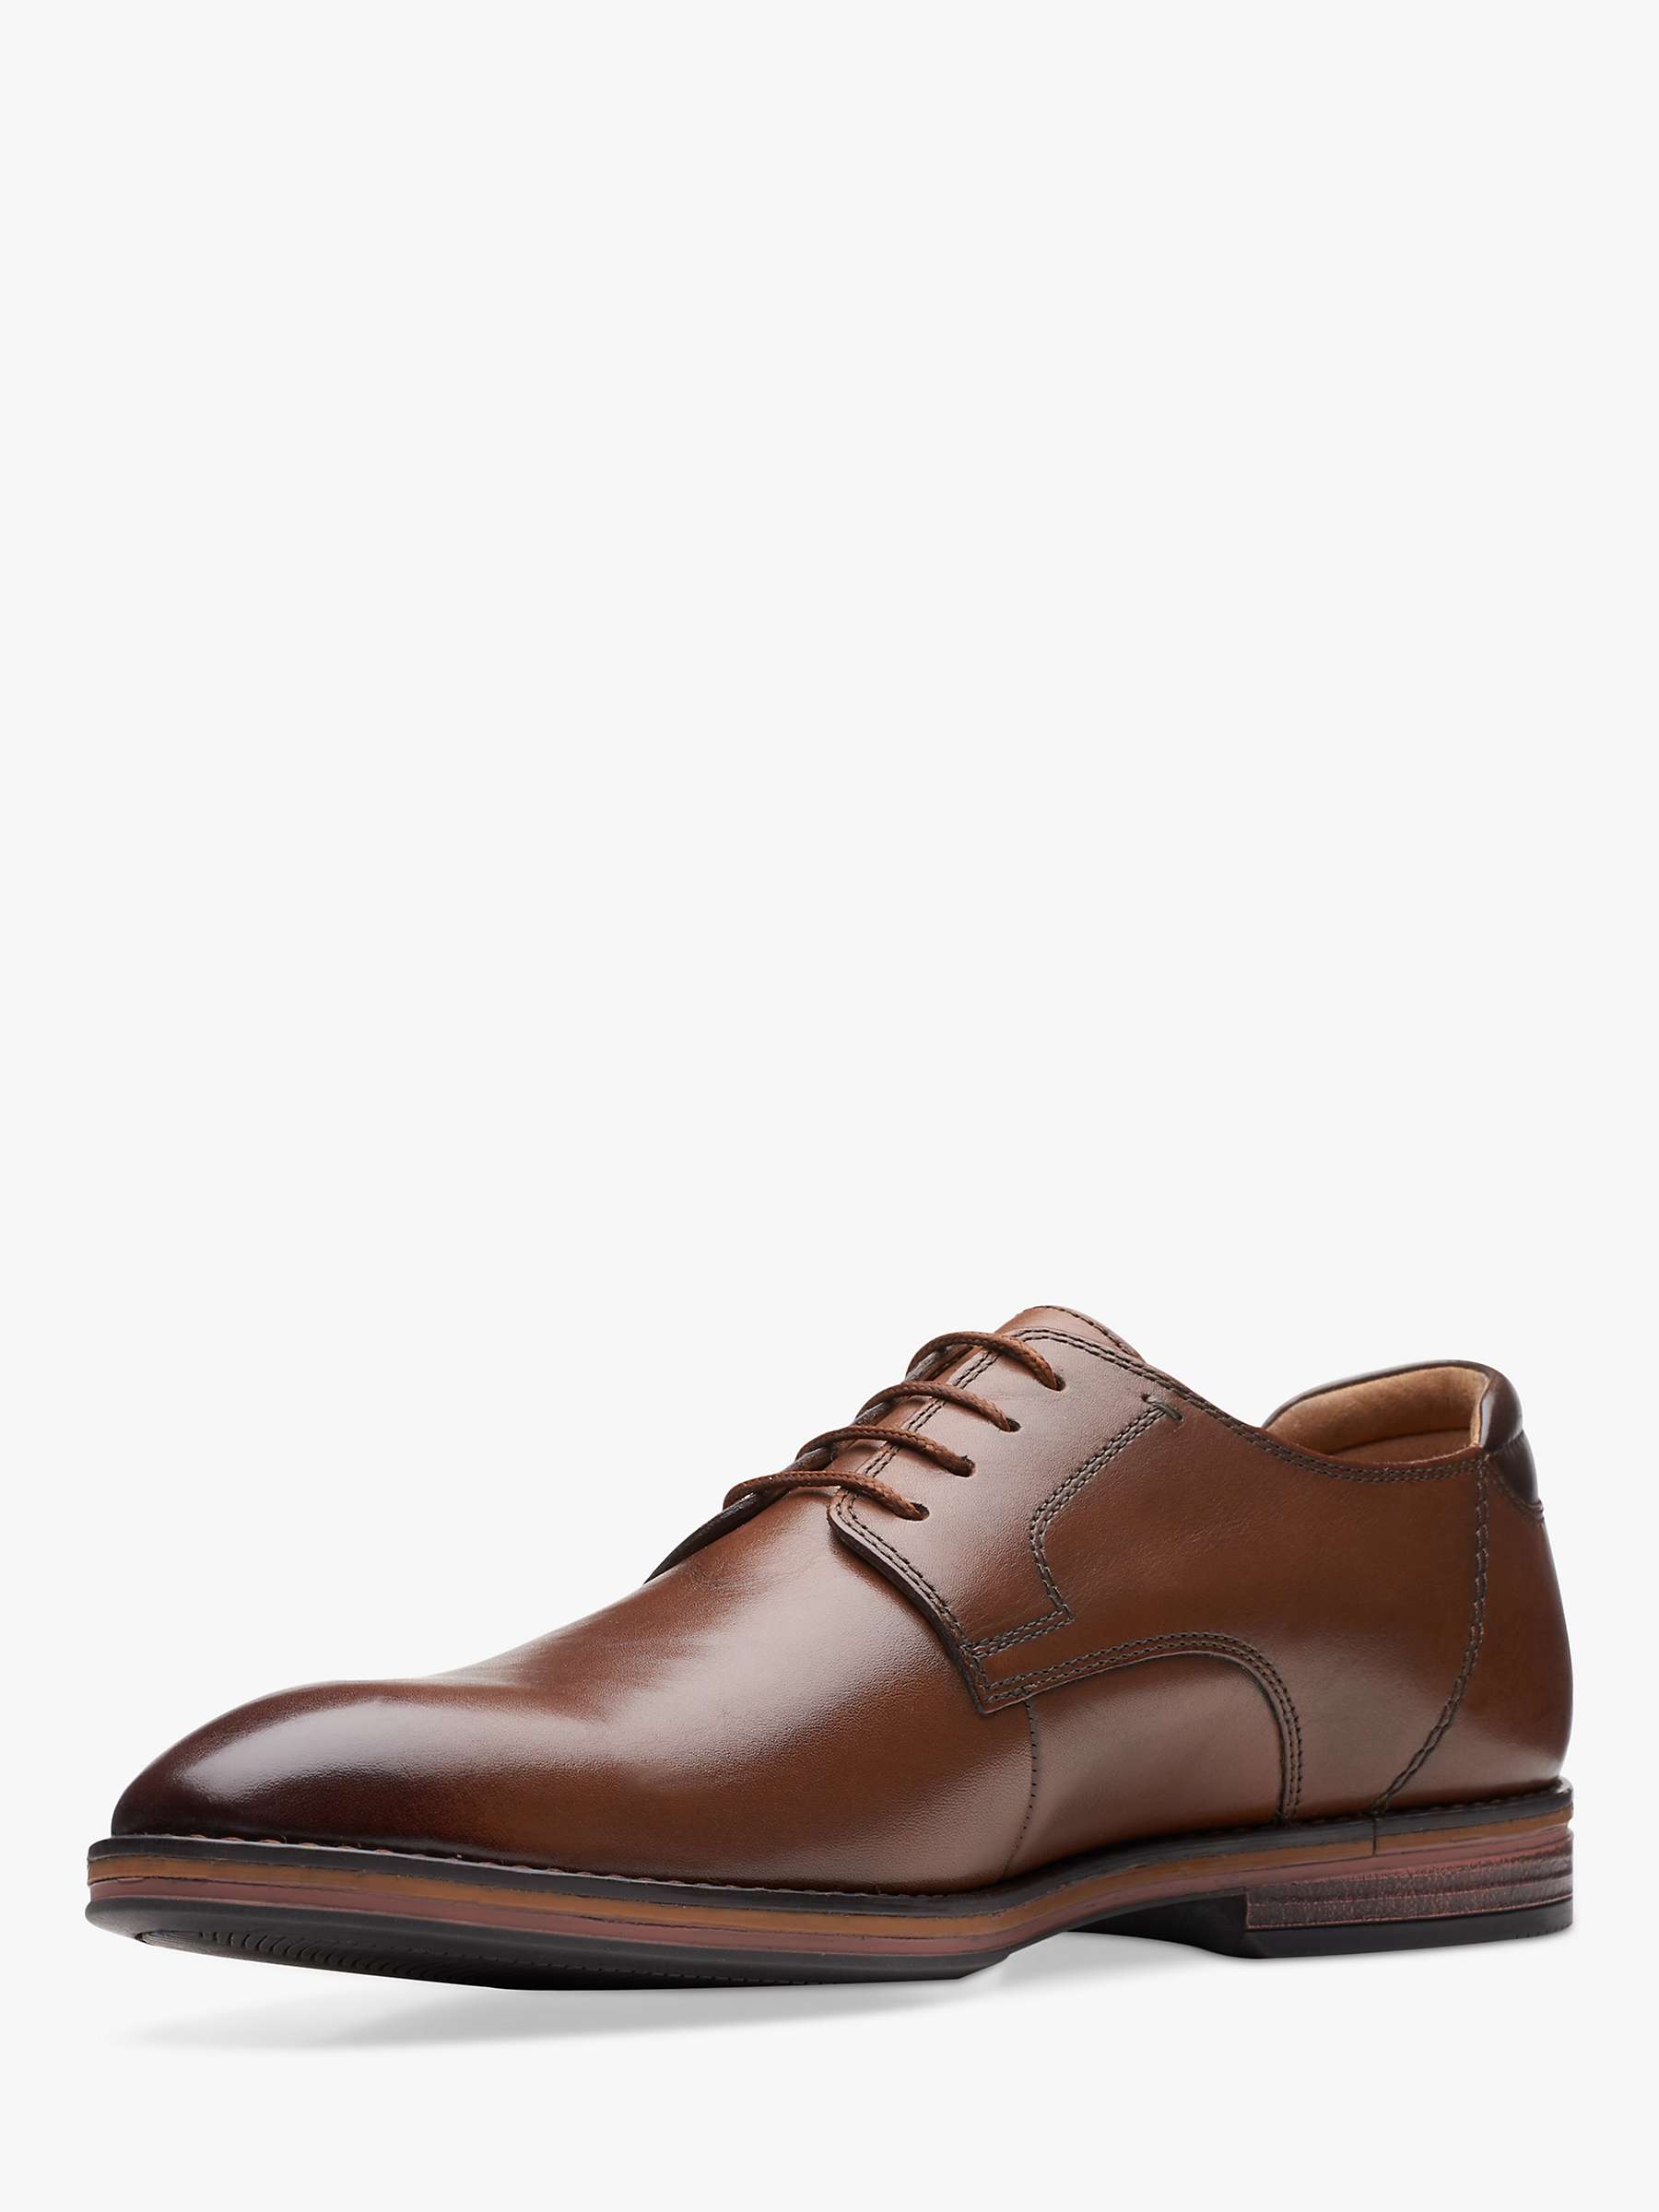 Buy Clarks CitiStride Walk Leather Shoes Online at johnlewis.com